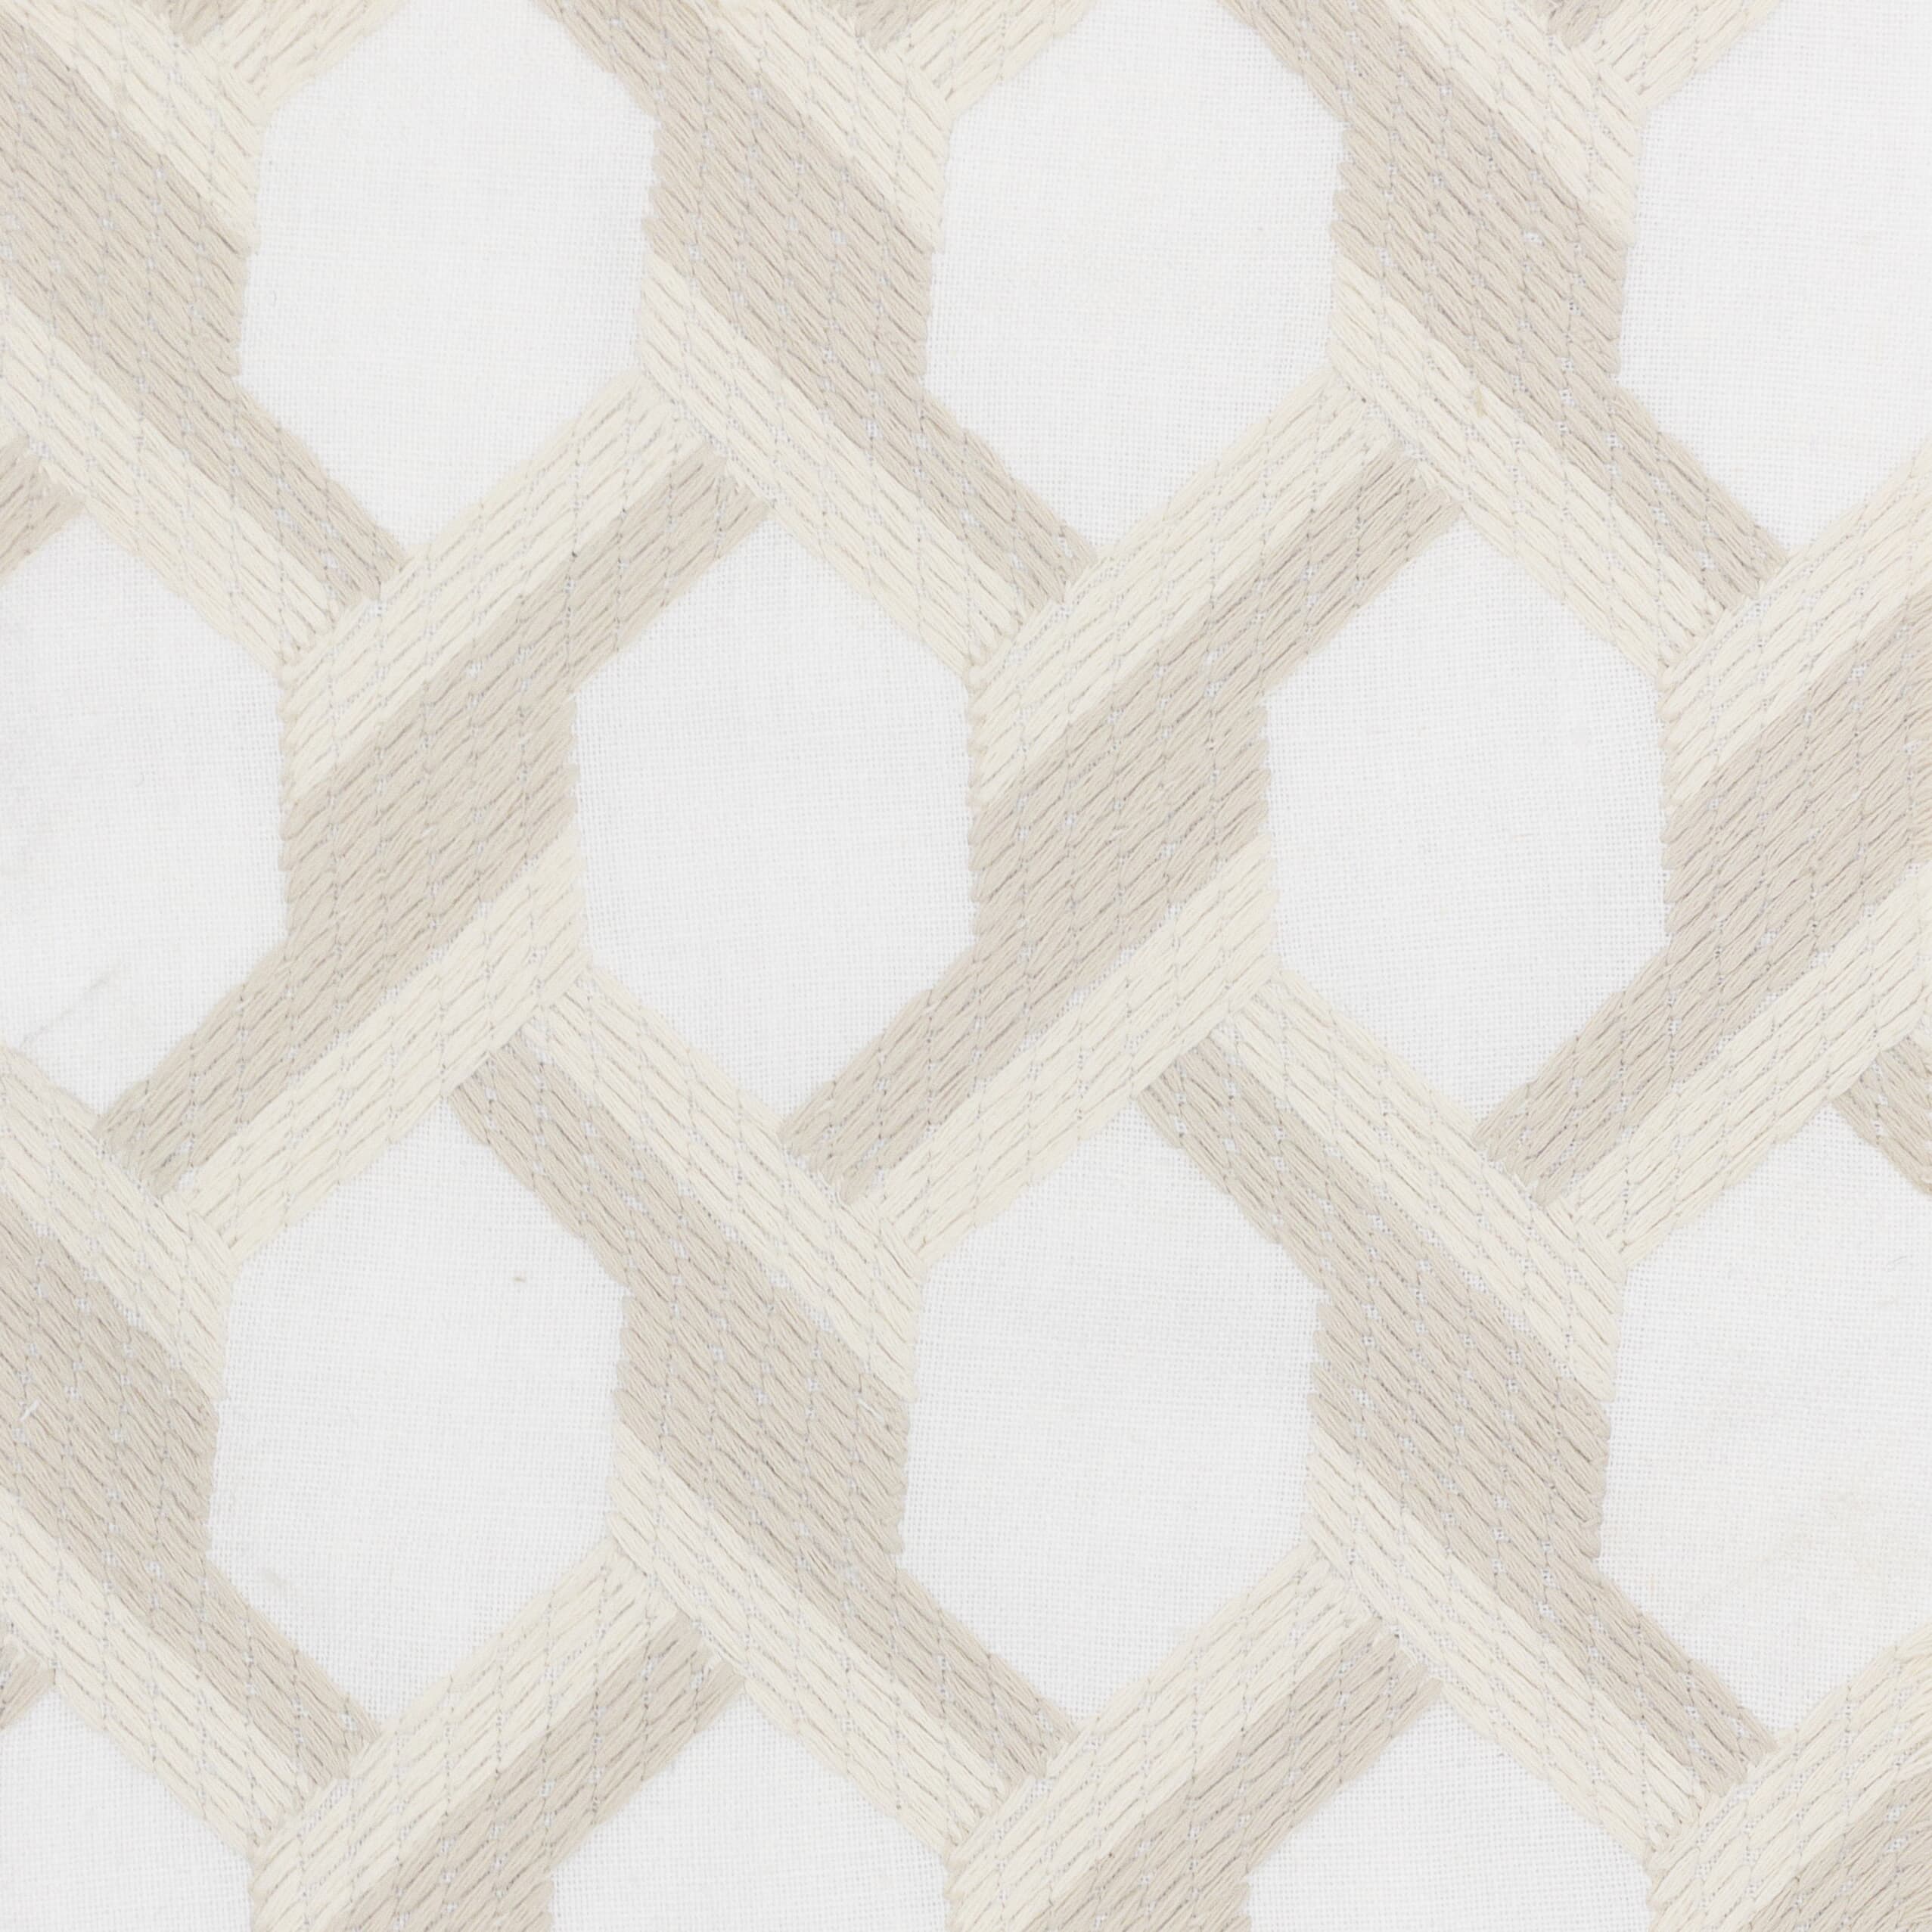 Wasco 1 Beige by Stout Fabric